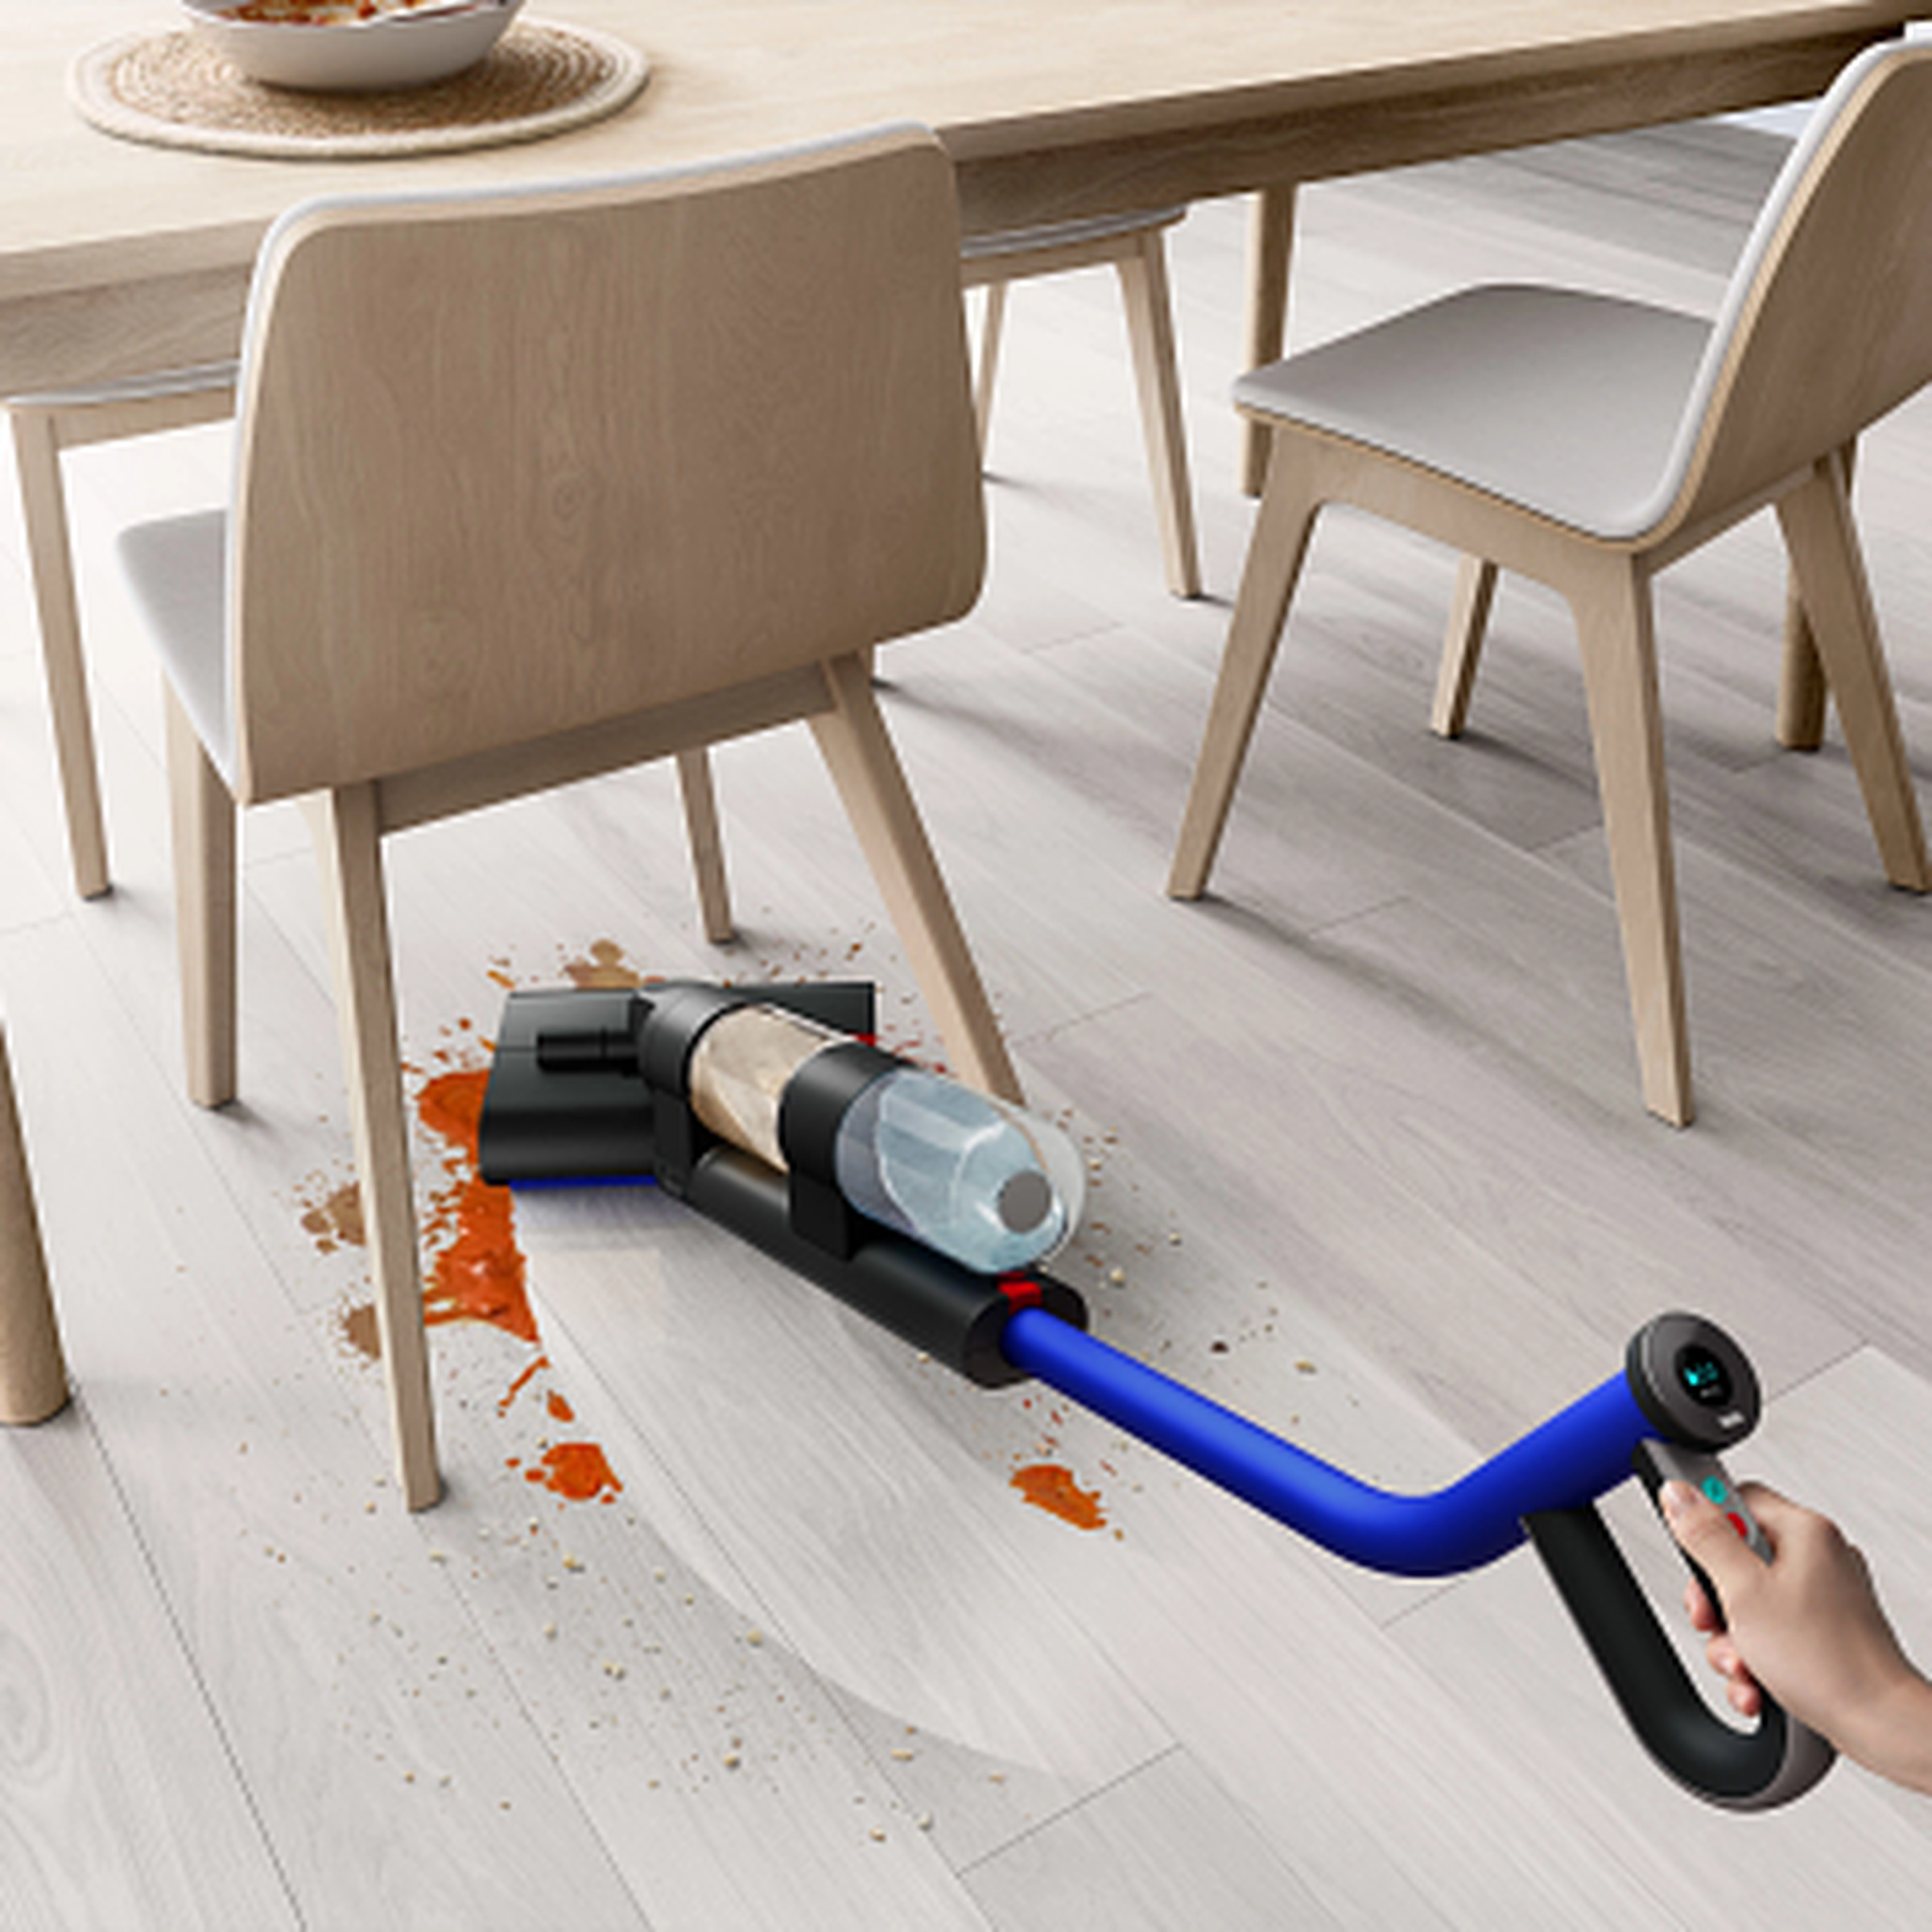 The Dyson WashG1 can wipe up wet messes.